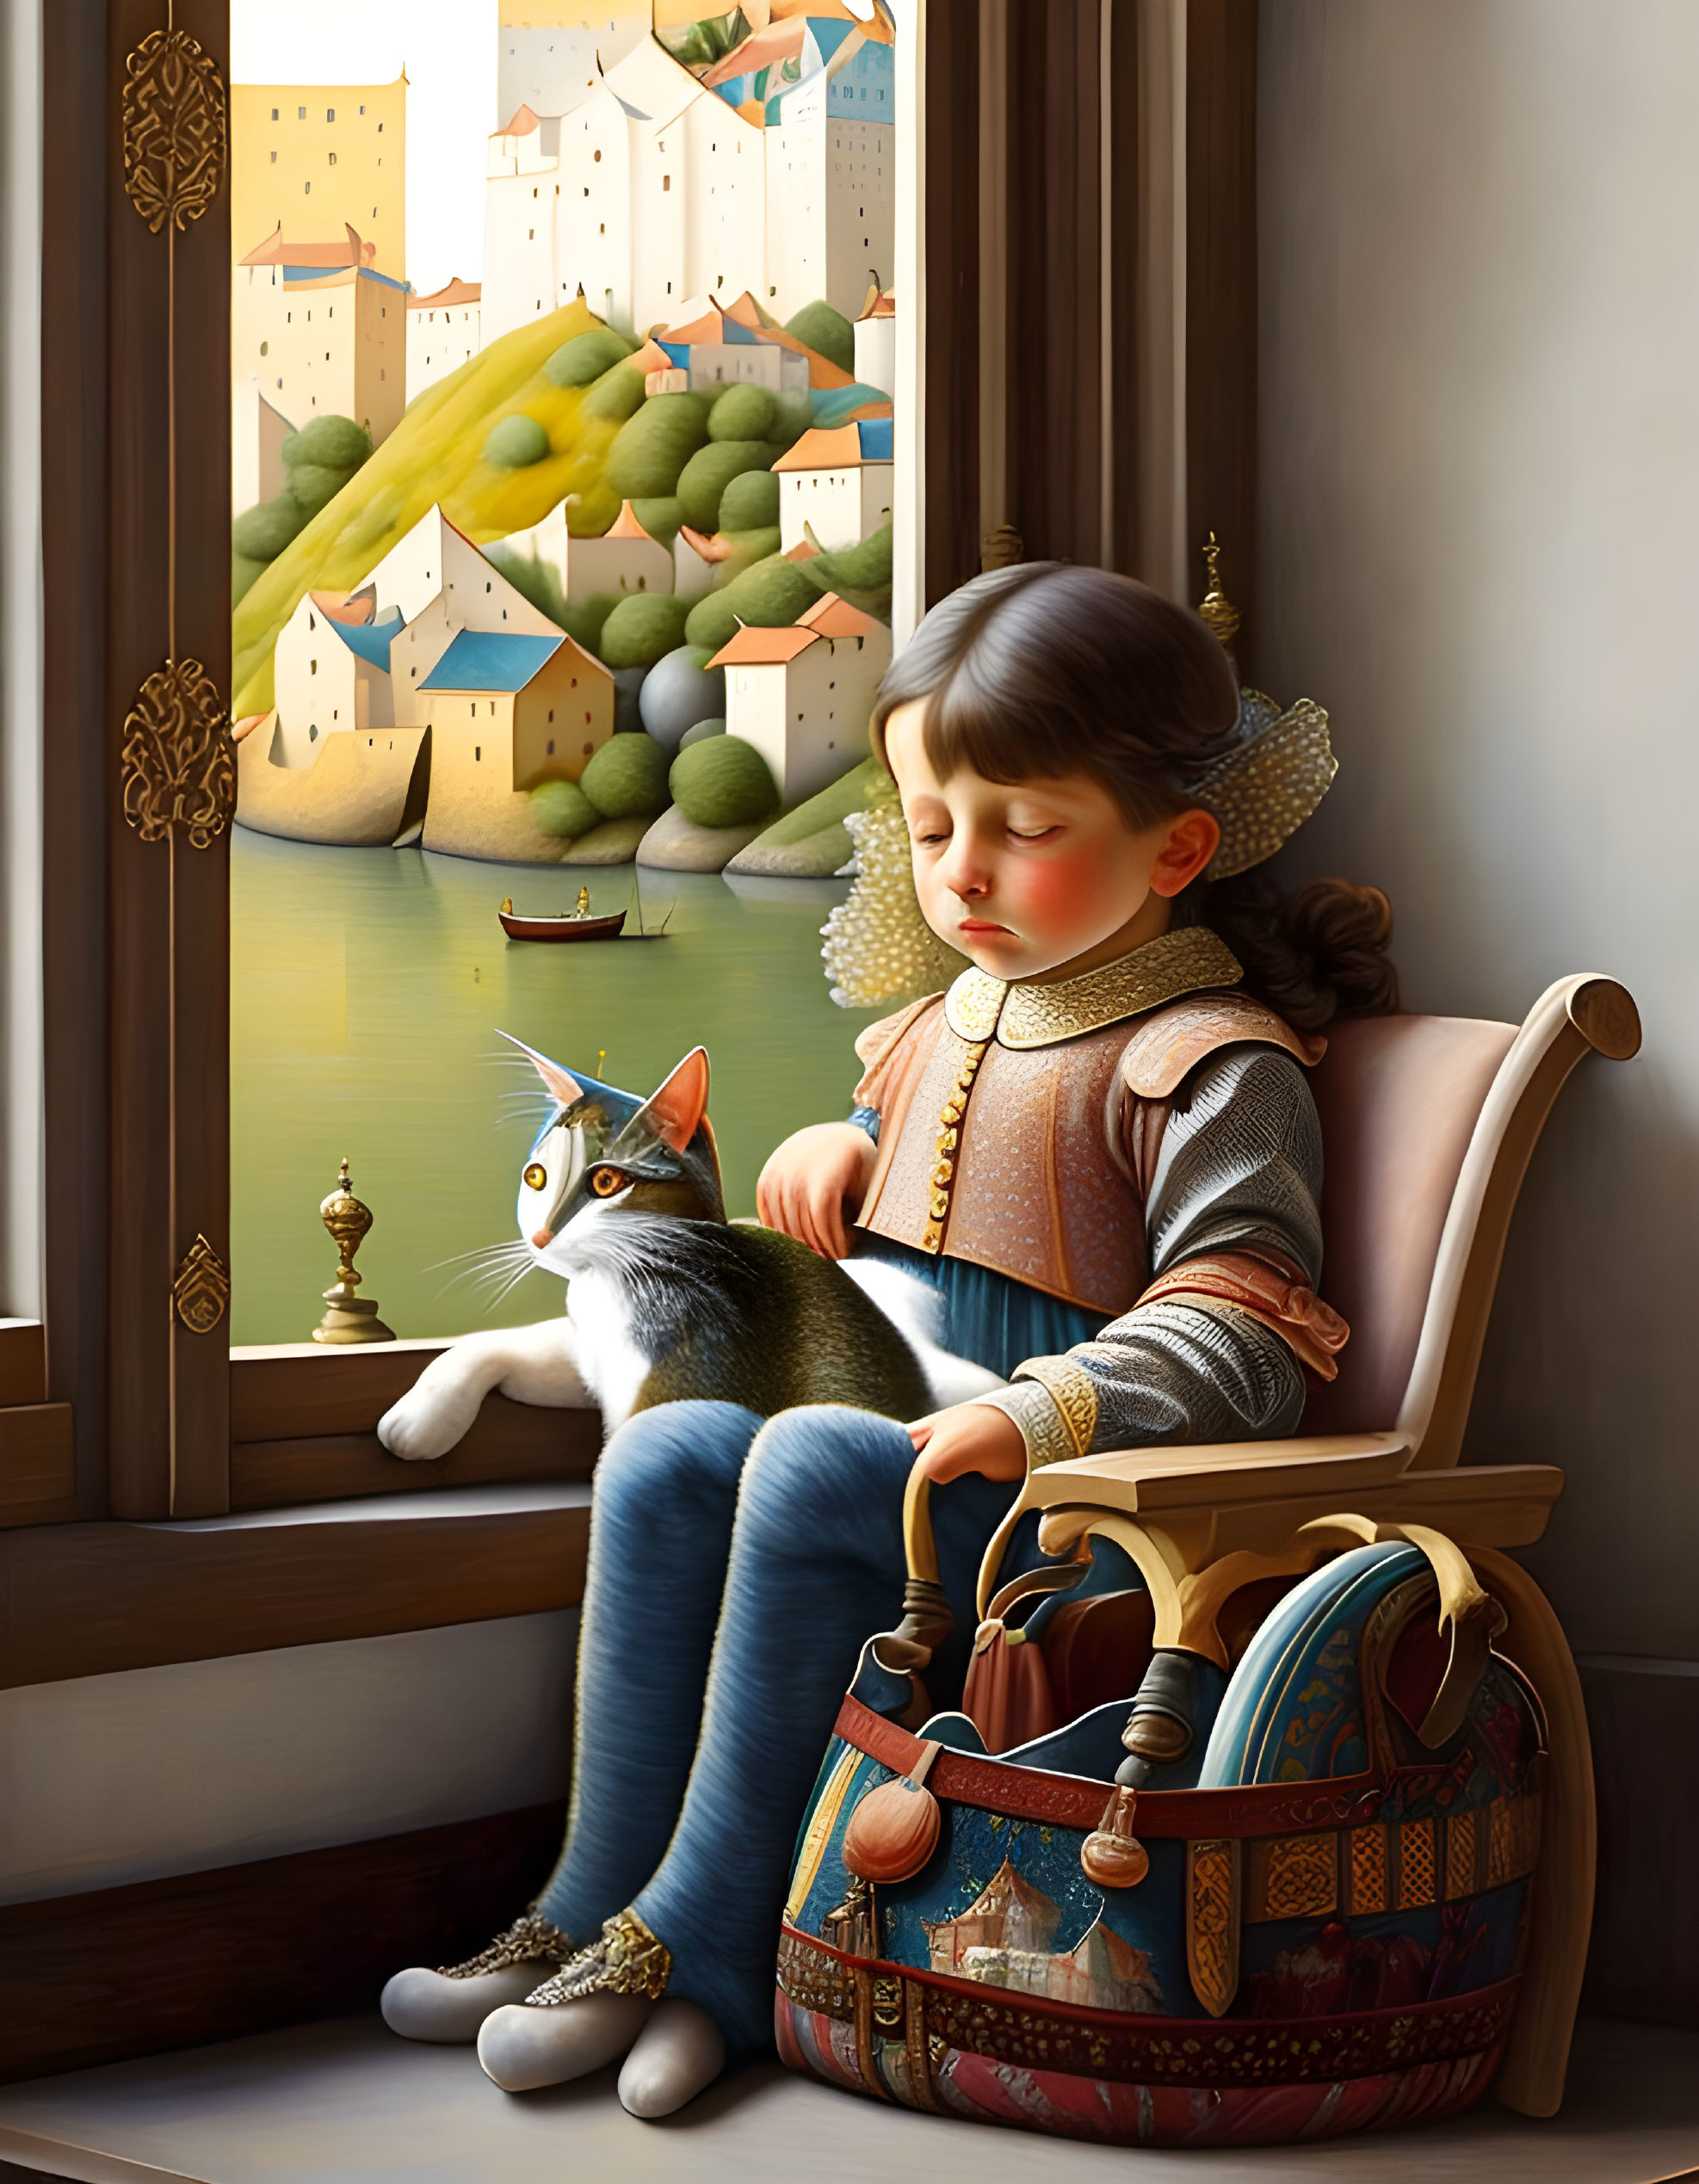 Child in historical clothing with cat gazes at serene town by water